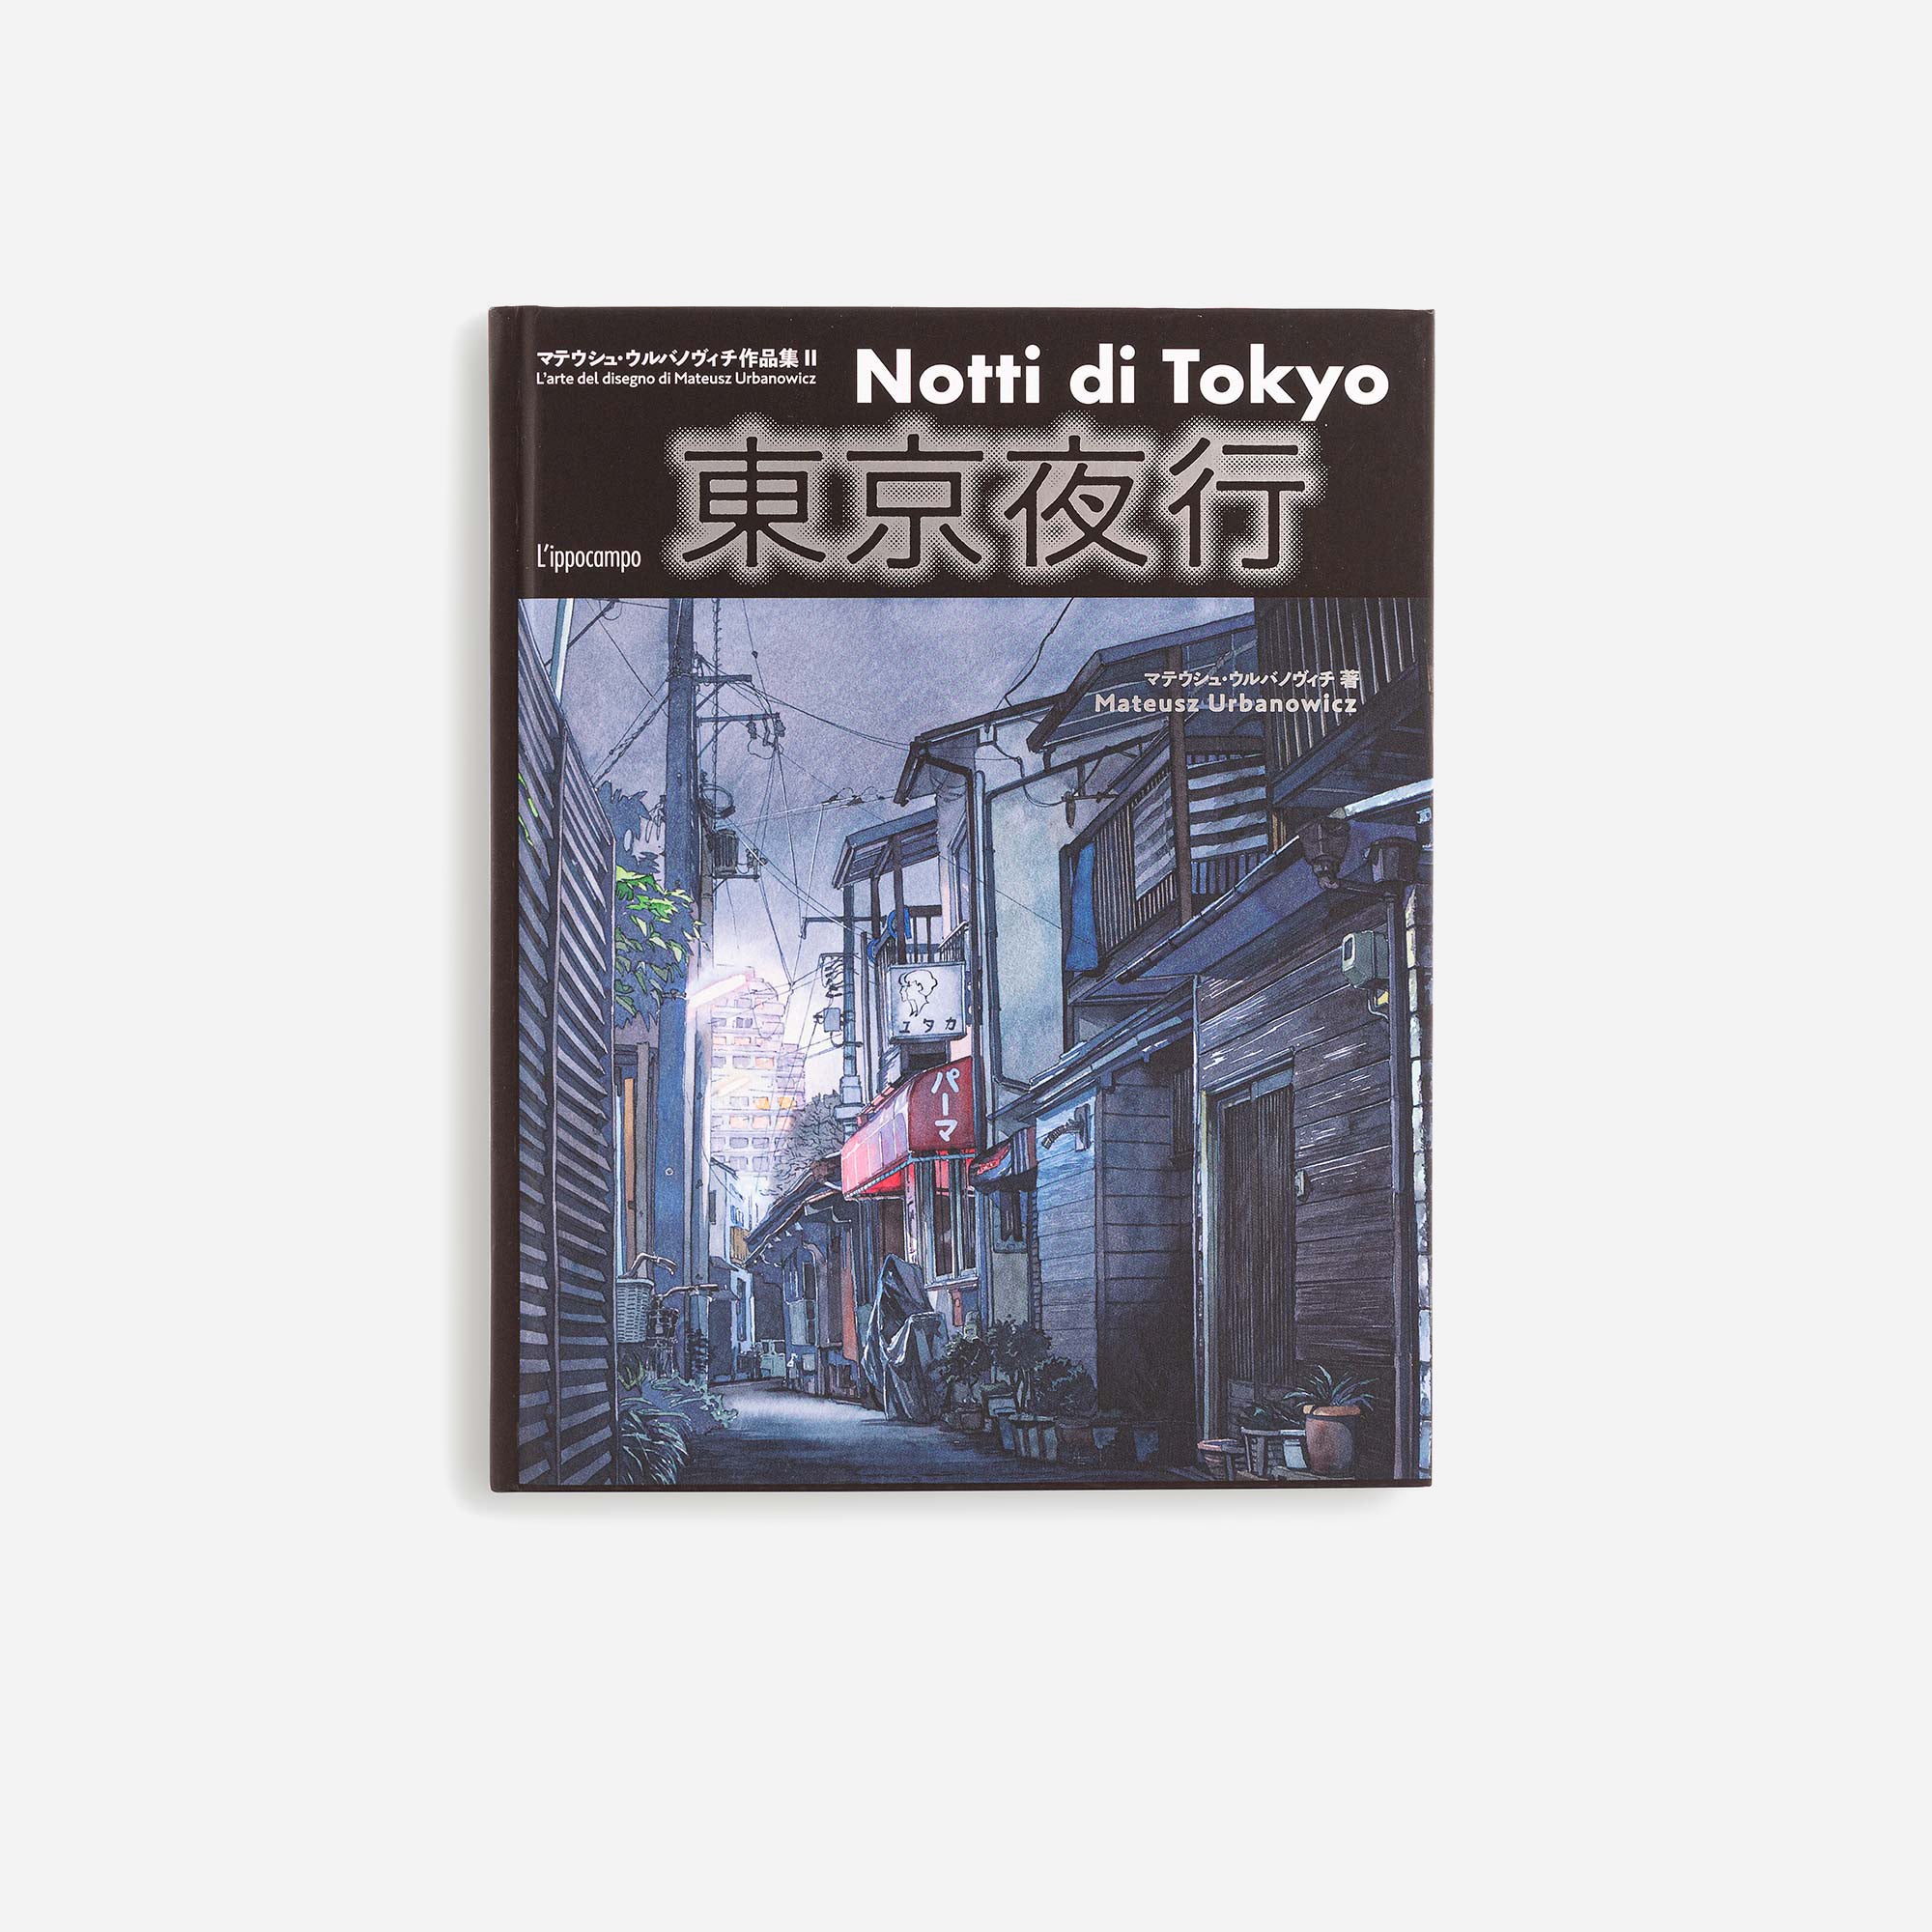 Tokyo Nights - The art of drawing by Mateusz Urbanowicz